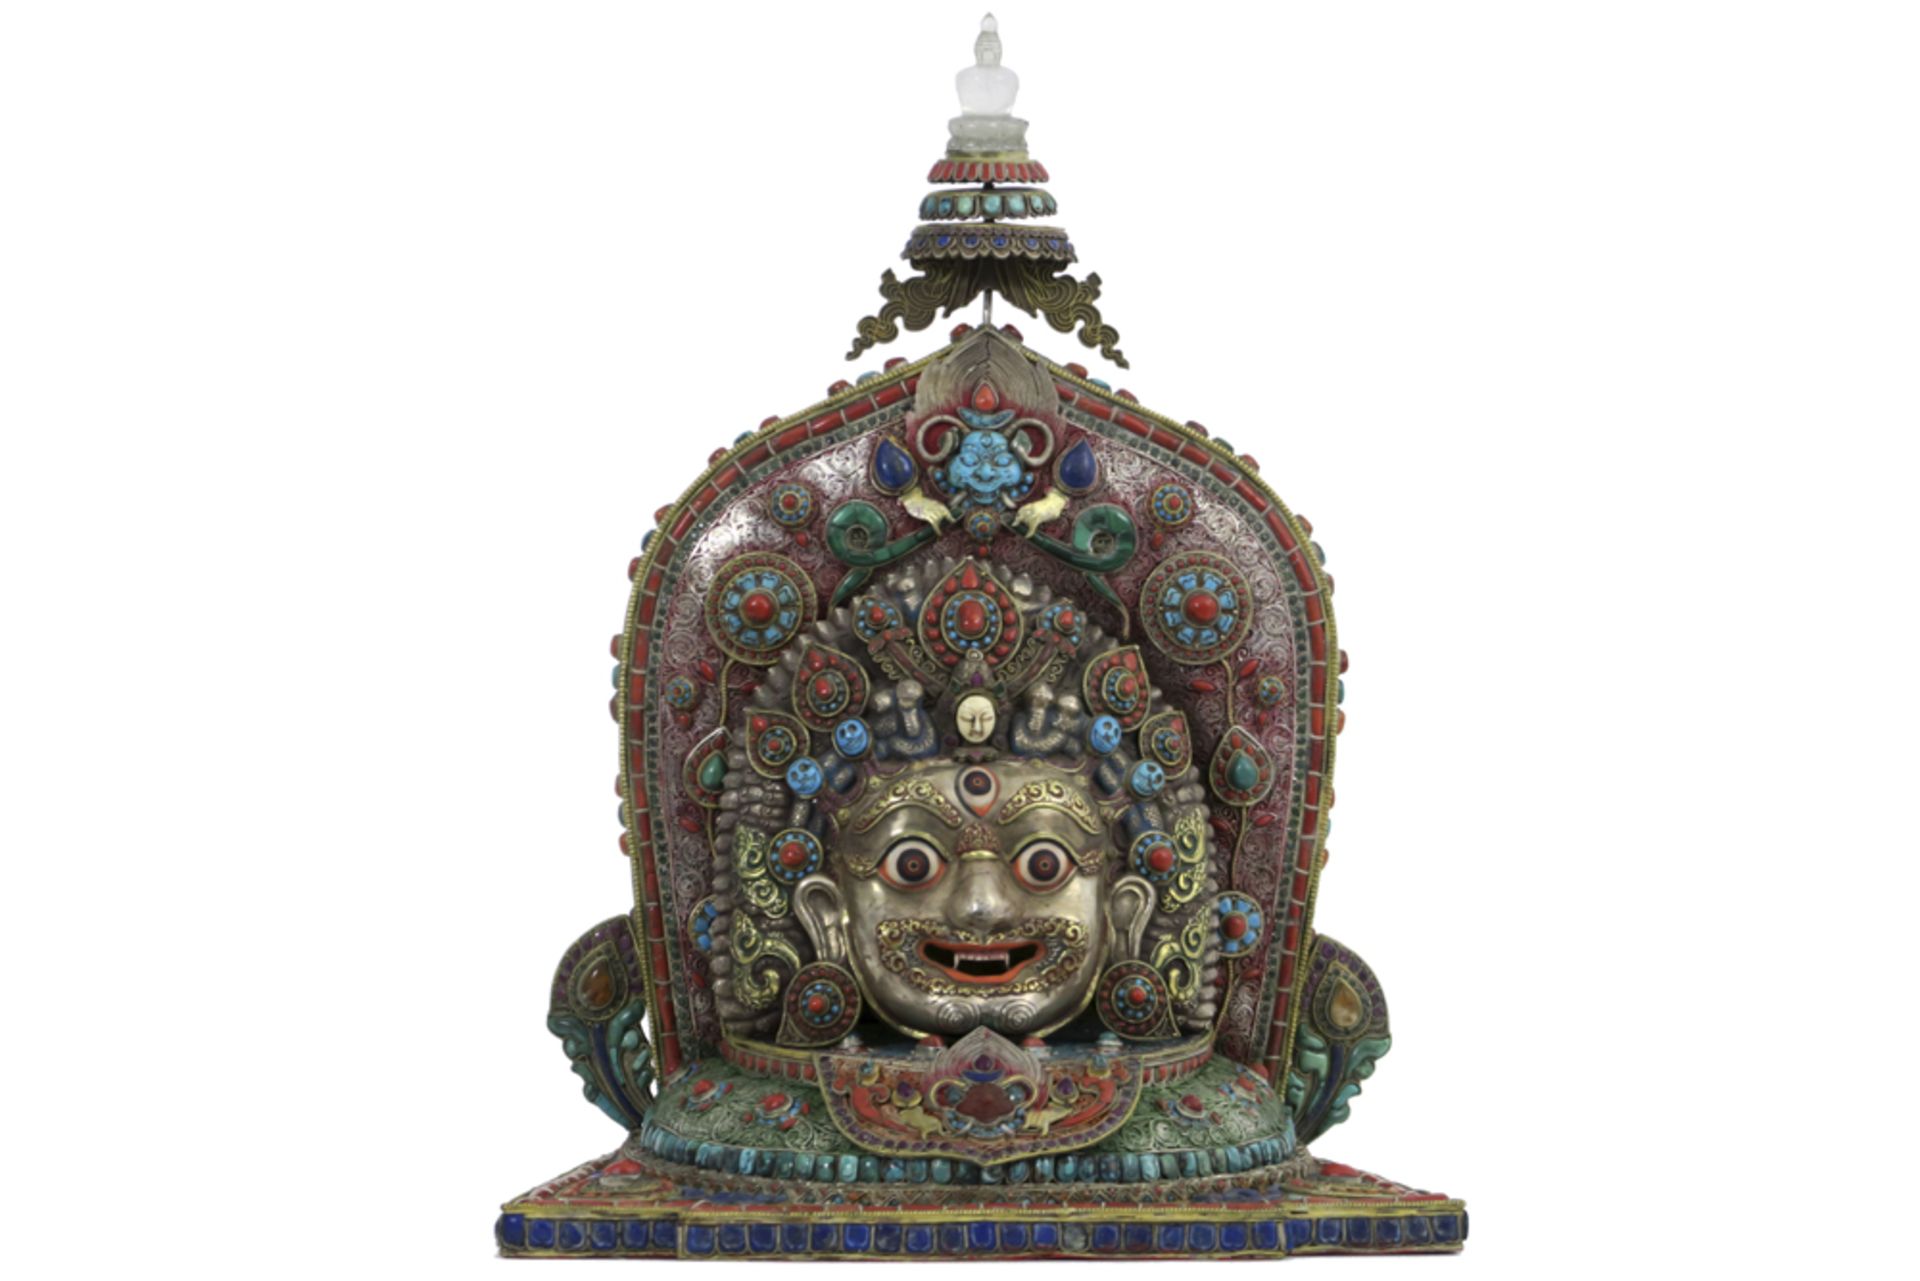 very nice old Nepalese house temple sculpture with a "Bhairava" mask - in silver, adorned with